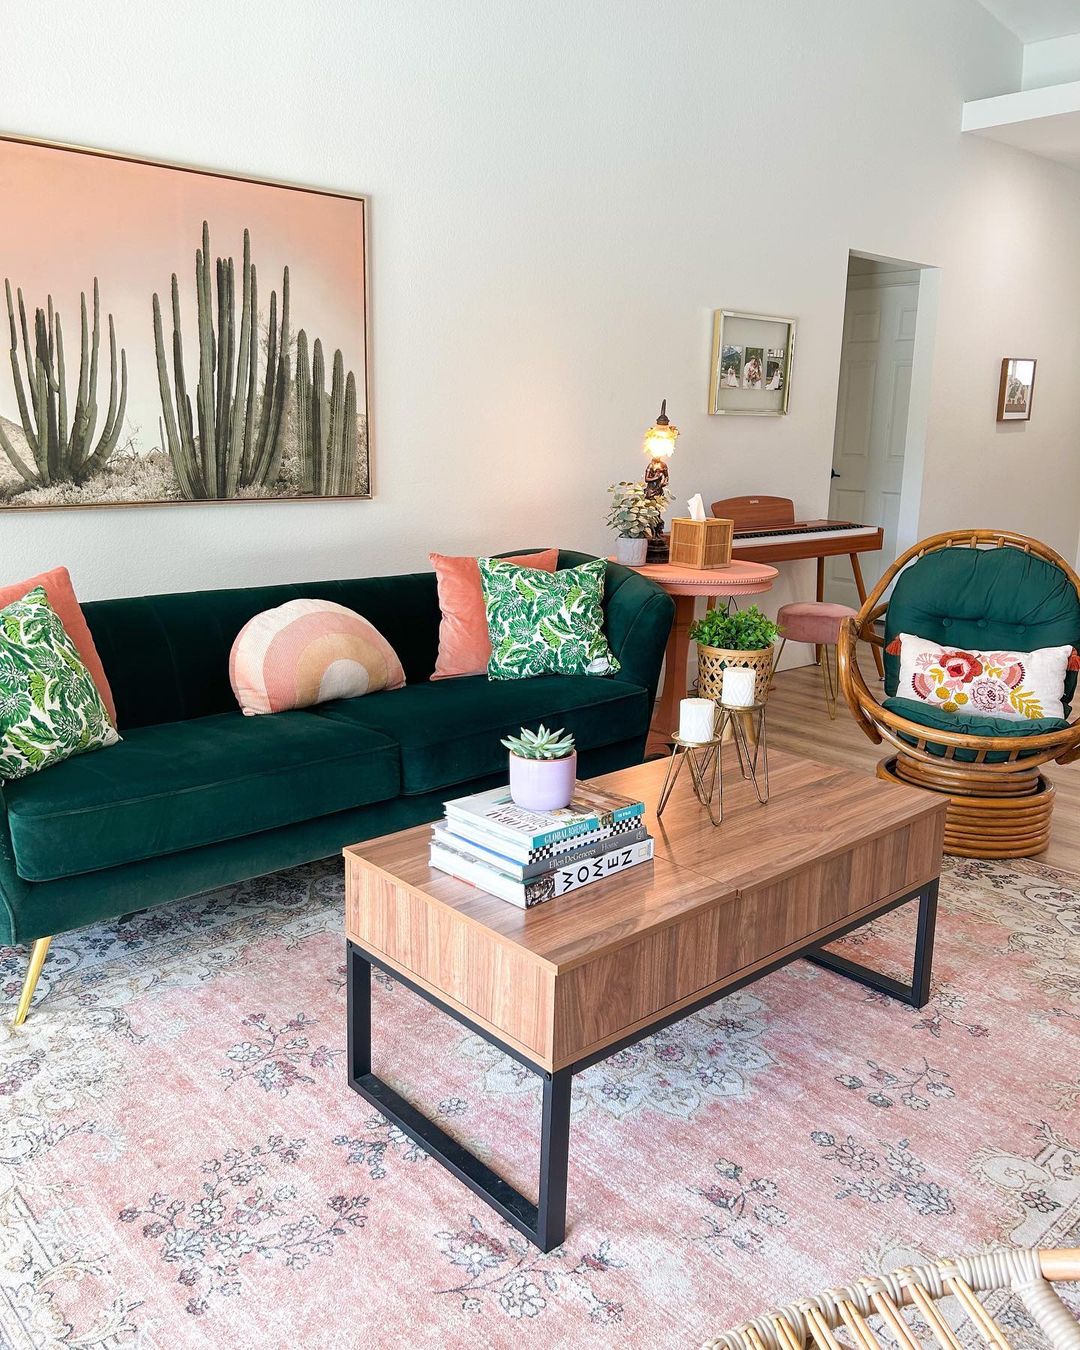 Incorporate Botanical Accents and Warm Tones